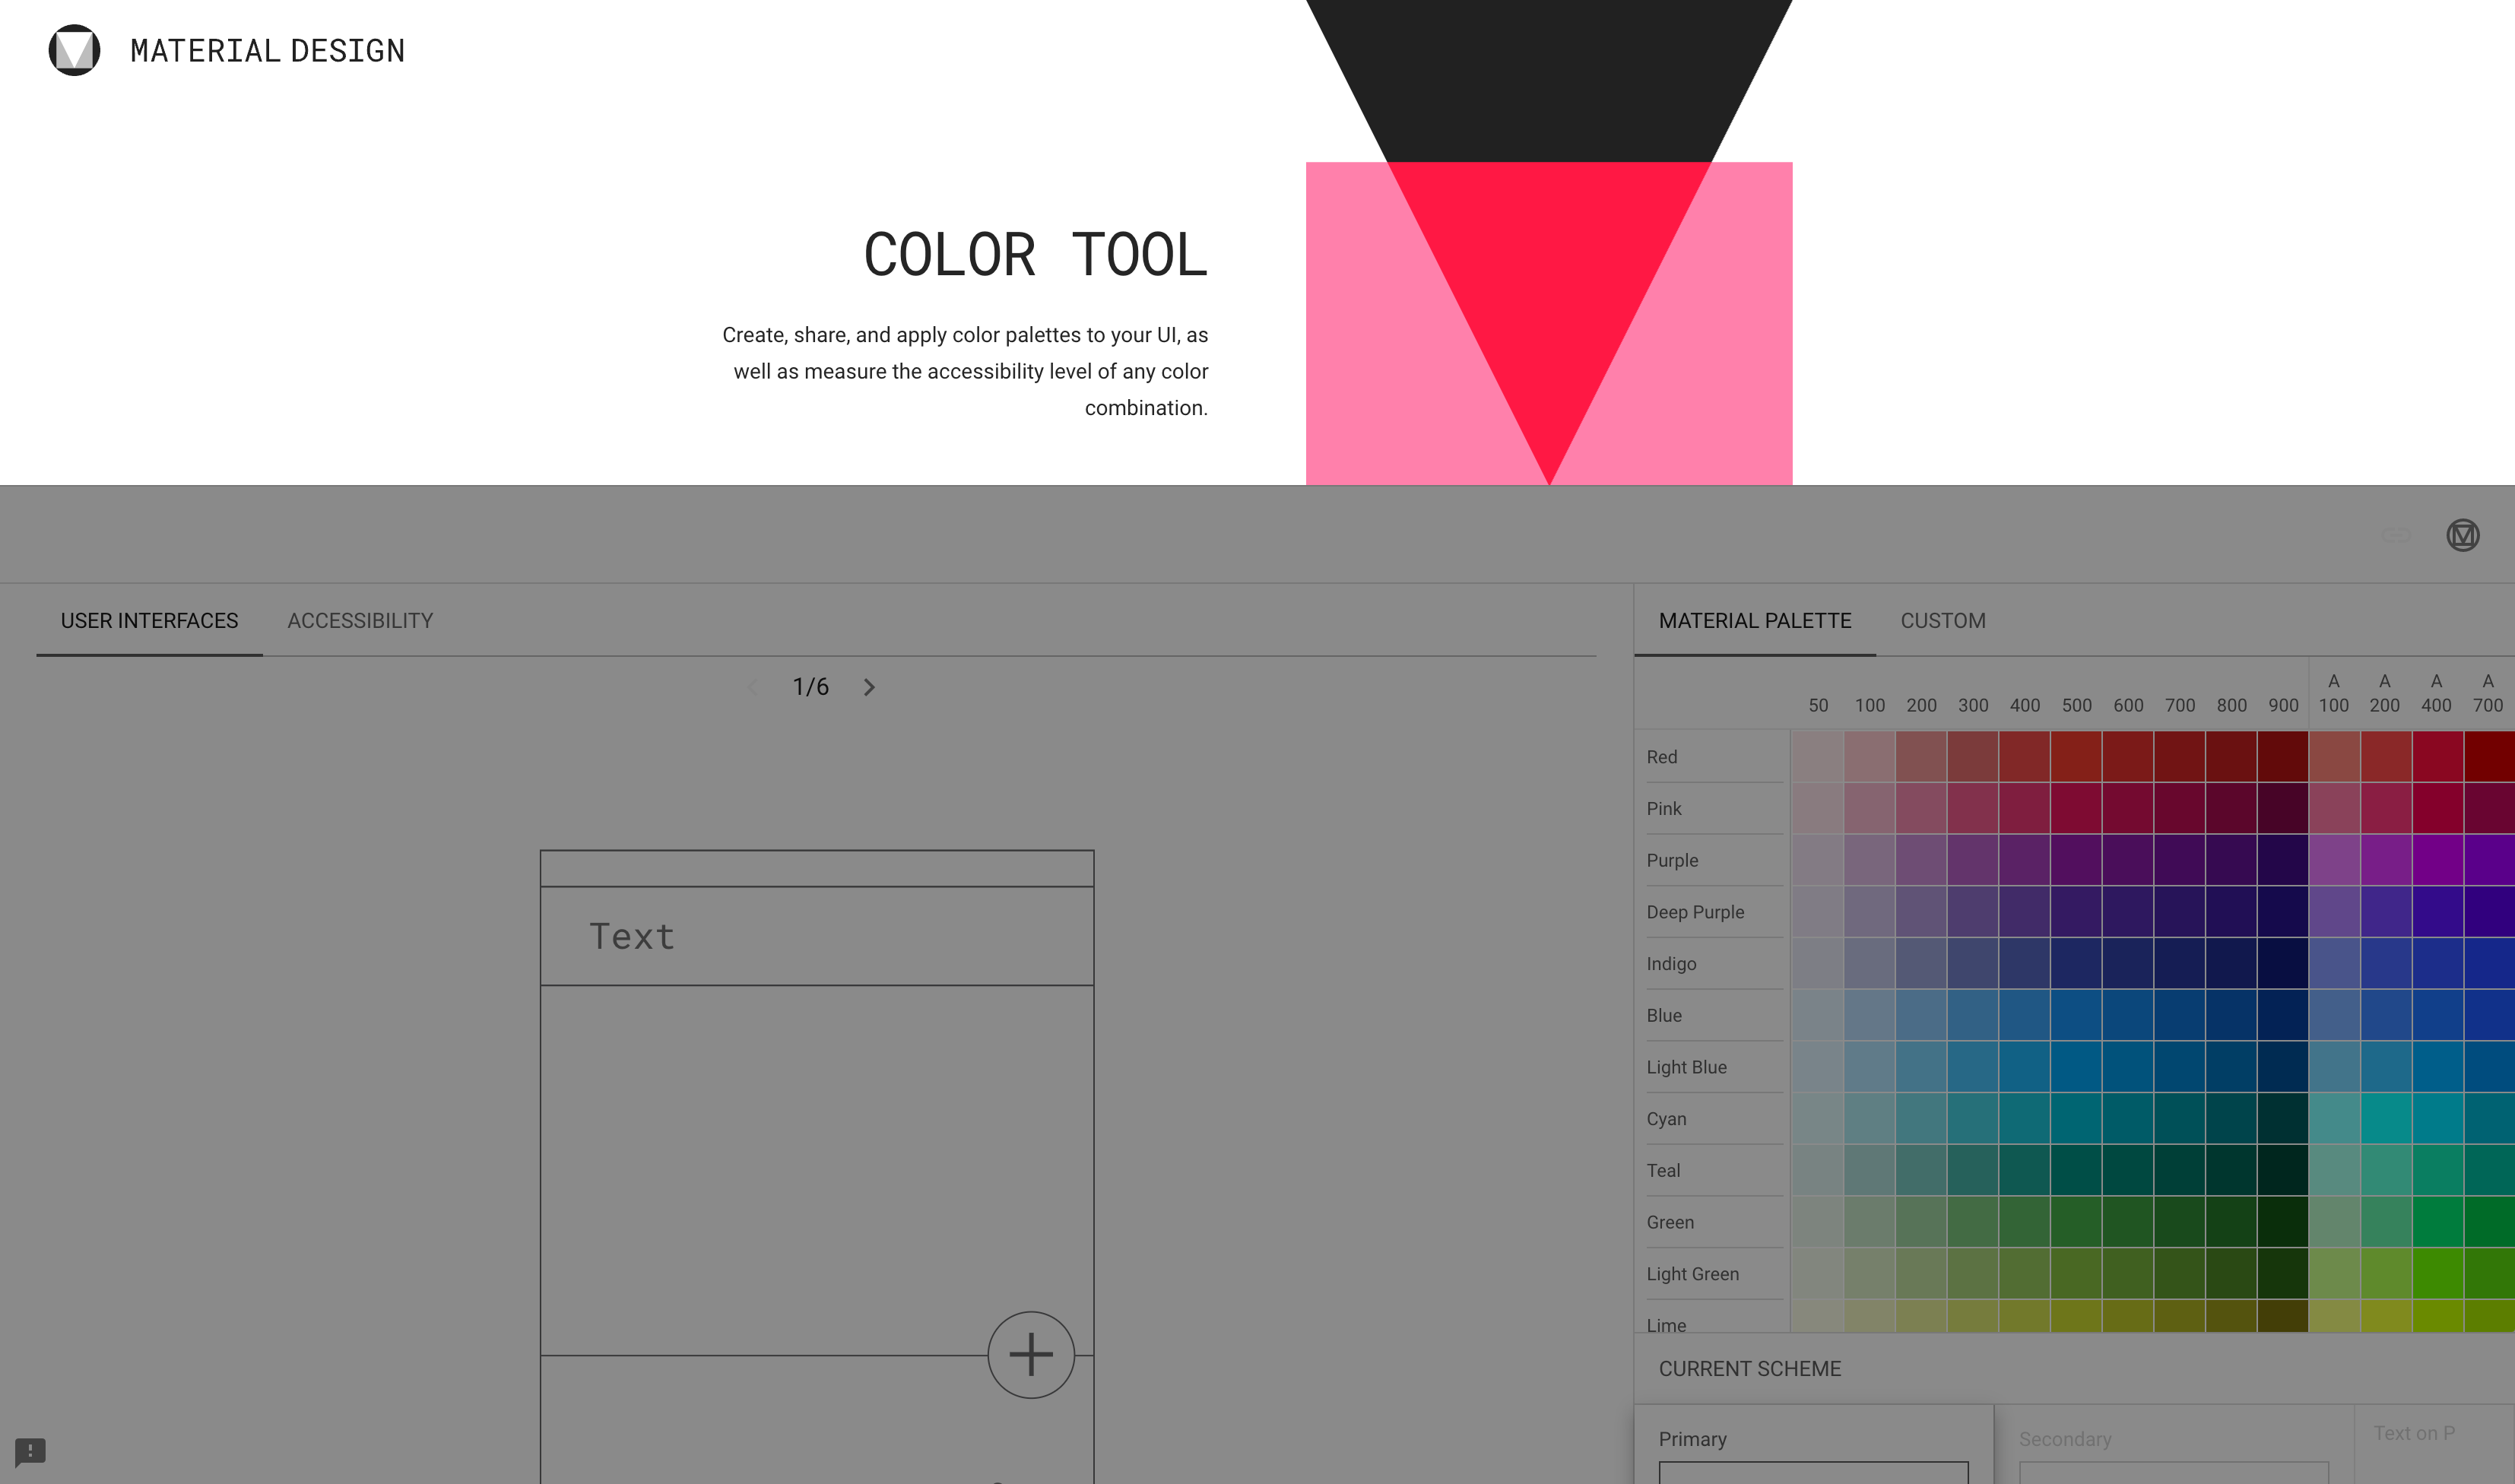 COLOR TOOL